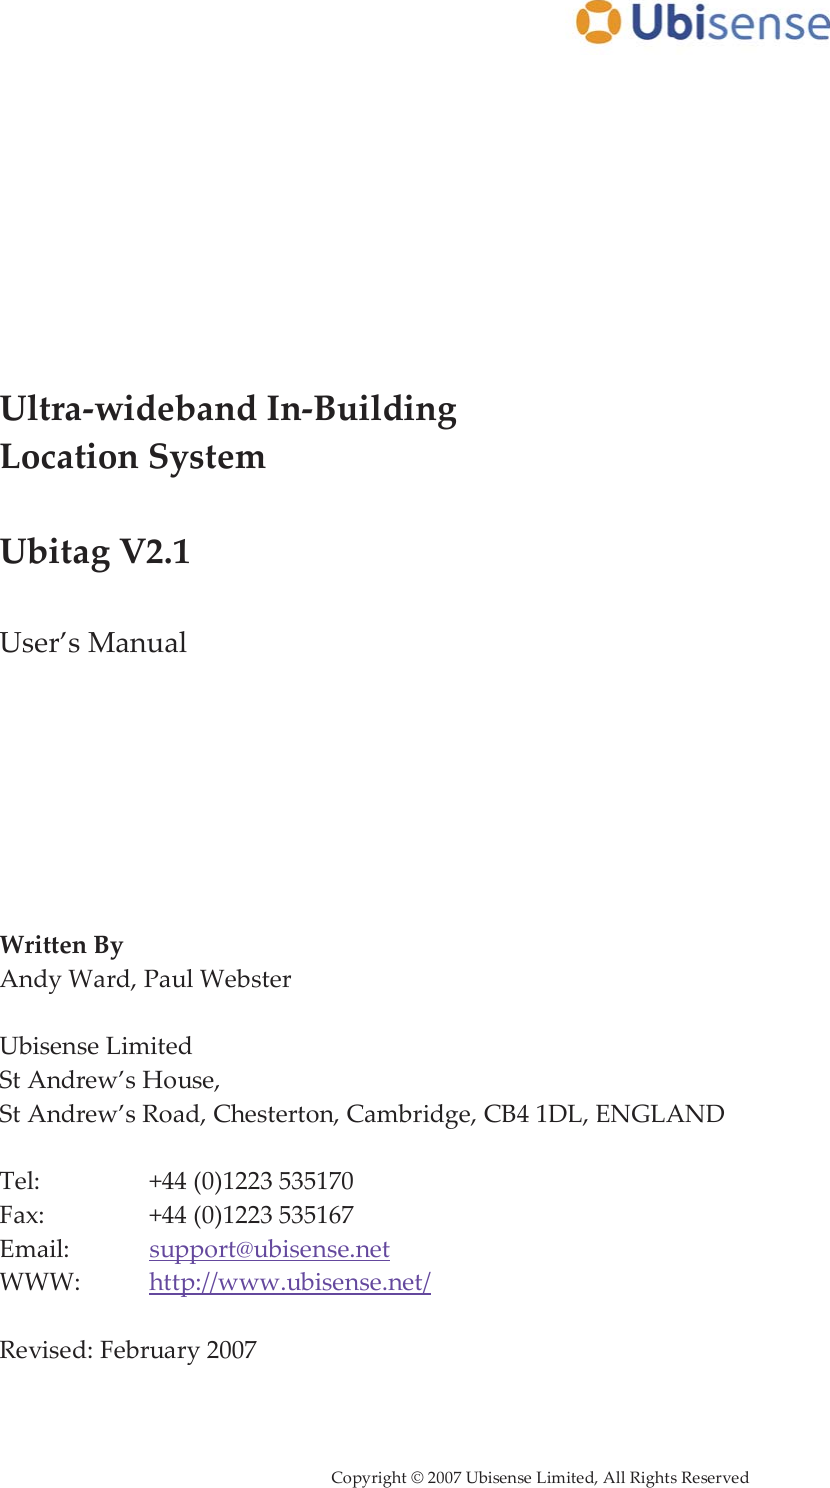      Copyright © 2007 Ubisense Limited, All Rights Reserved            Ultra-wideband In-Building Location System  Ubitag V2.1  User’s Manual         Written By Andy Ward, Paul Webster  Ubisense Limited St Andrew’s House,  St Andrew’s Road, Chesterton, Cambridge, CB4 1DL, ENGLAND  Tel:     +44 (0)1223 535170 Fax:     +44 (0)1223 535167 Email:    support@ubisense.net WWW:   http://www.ubisense.net/  Revised: February 2007  